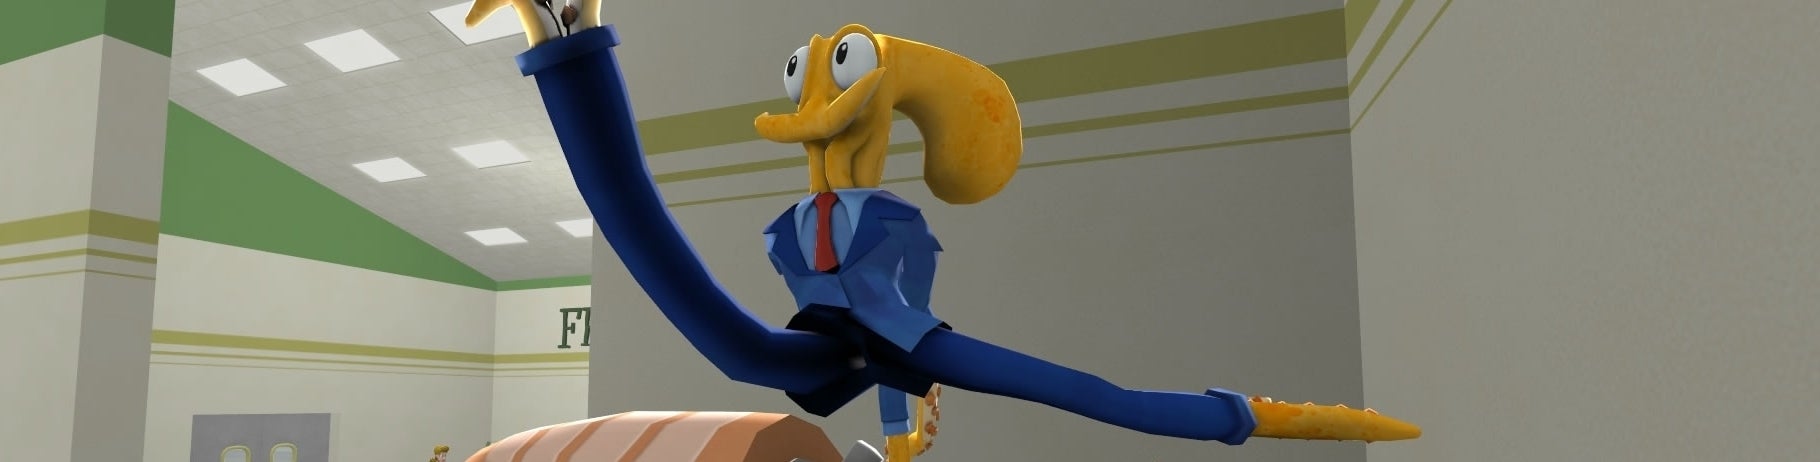 Image for Eight arms to hold you: Getting hitched in Octodad: The Dadliest Catch